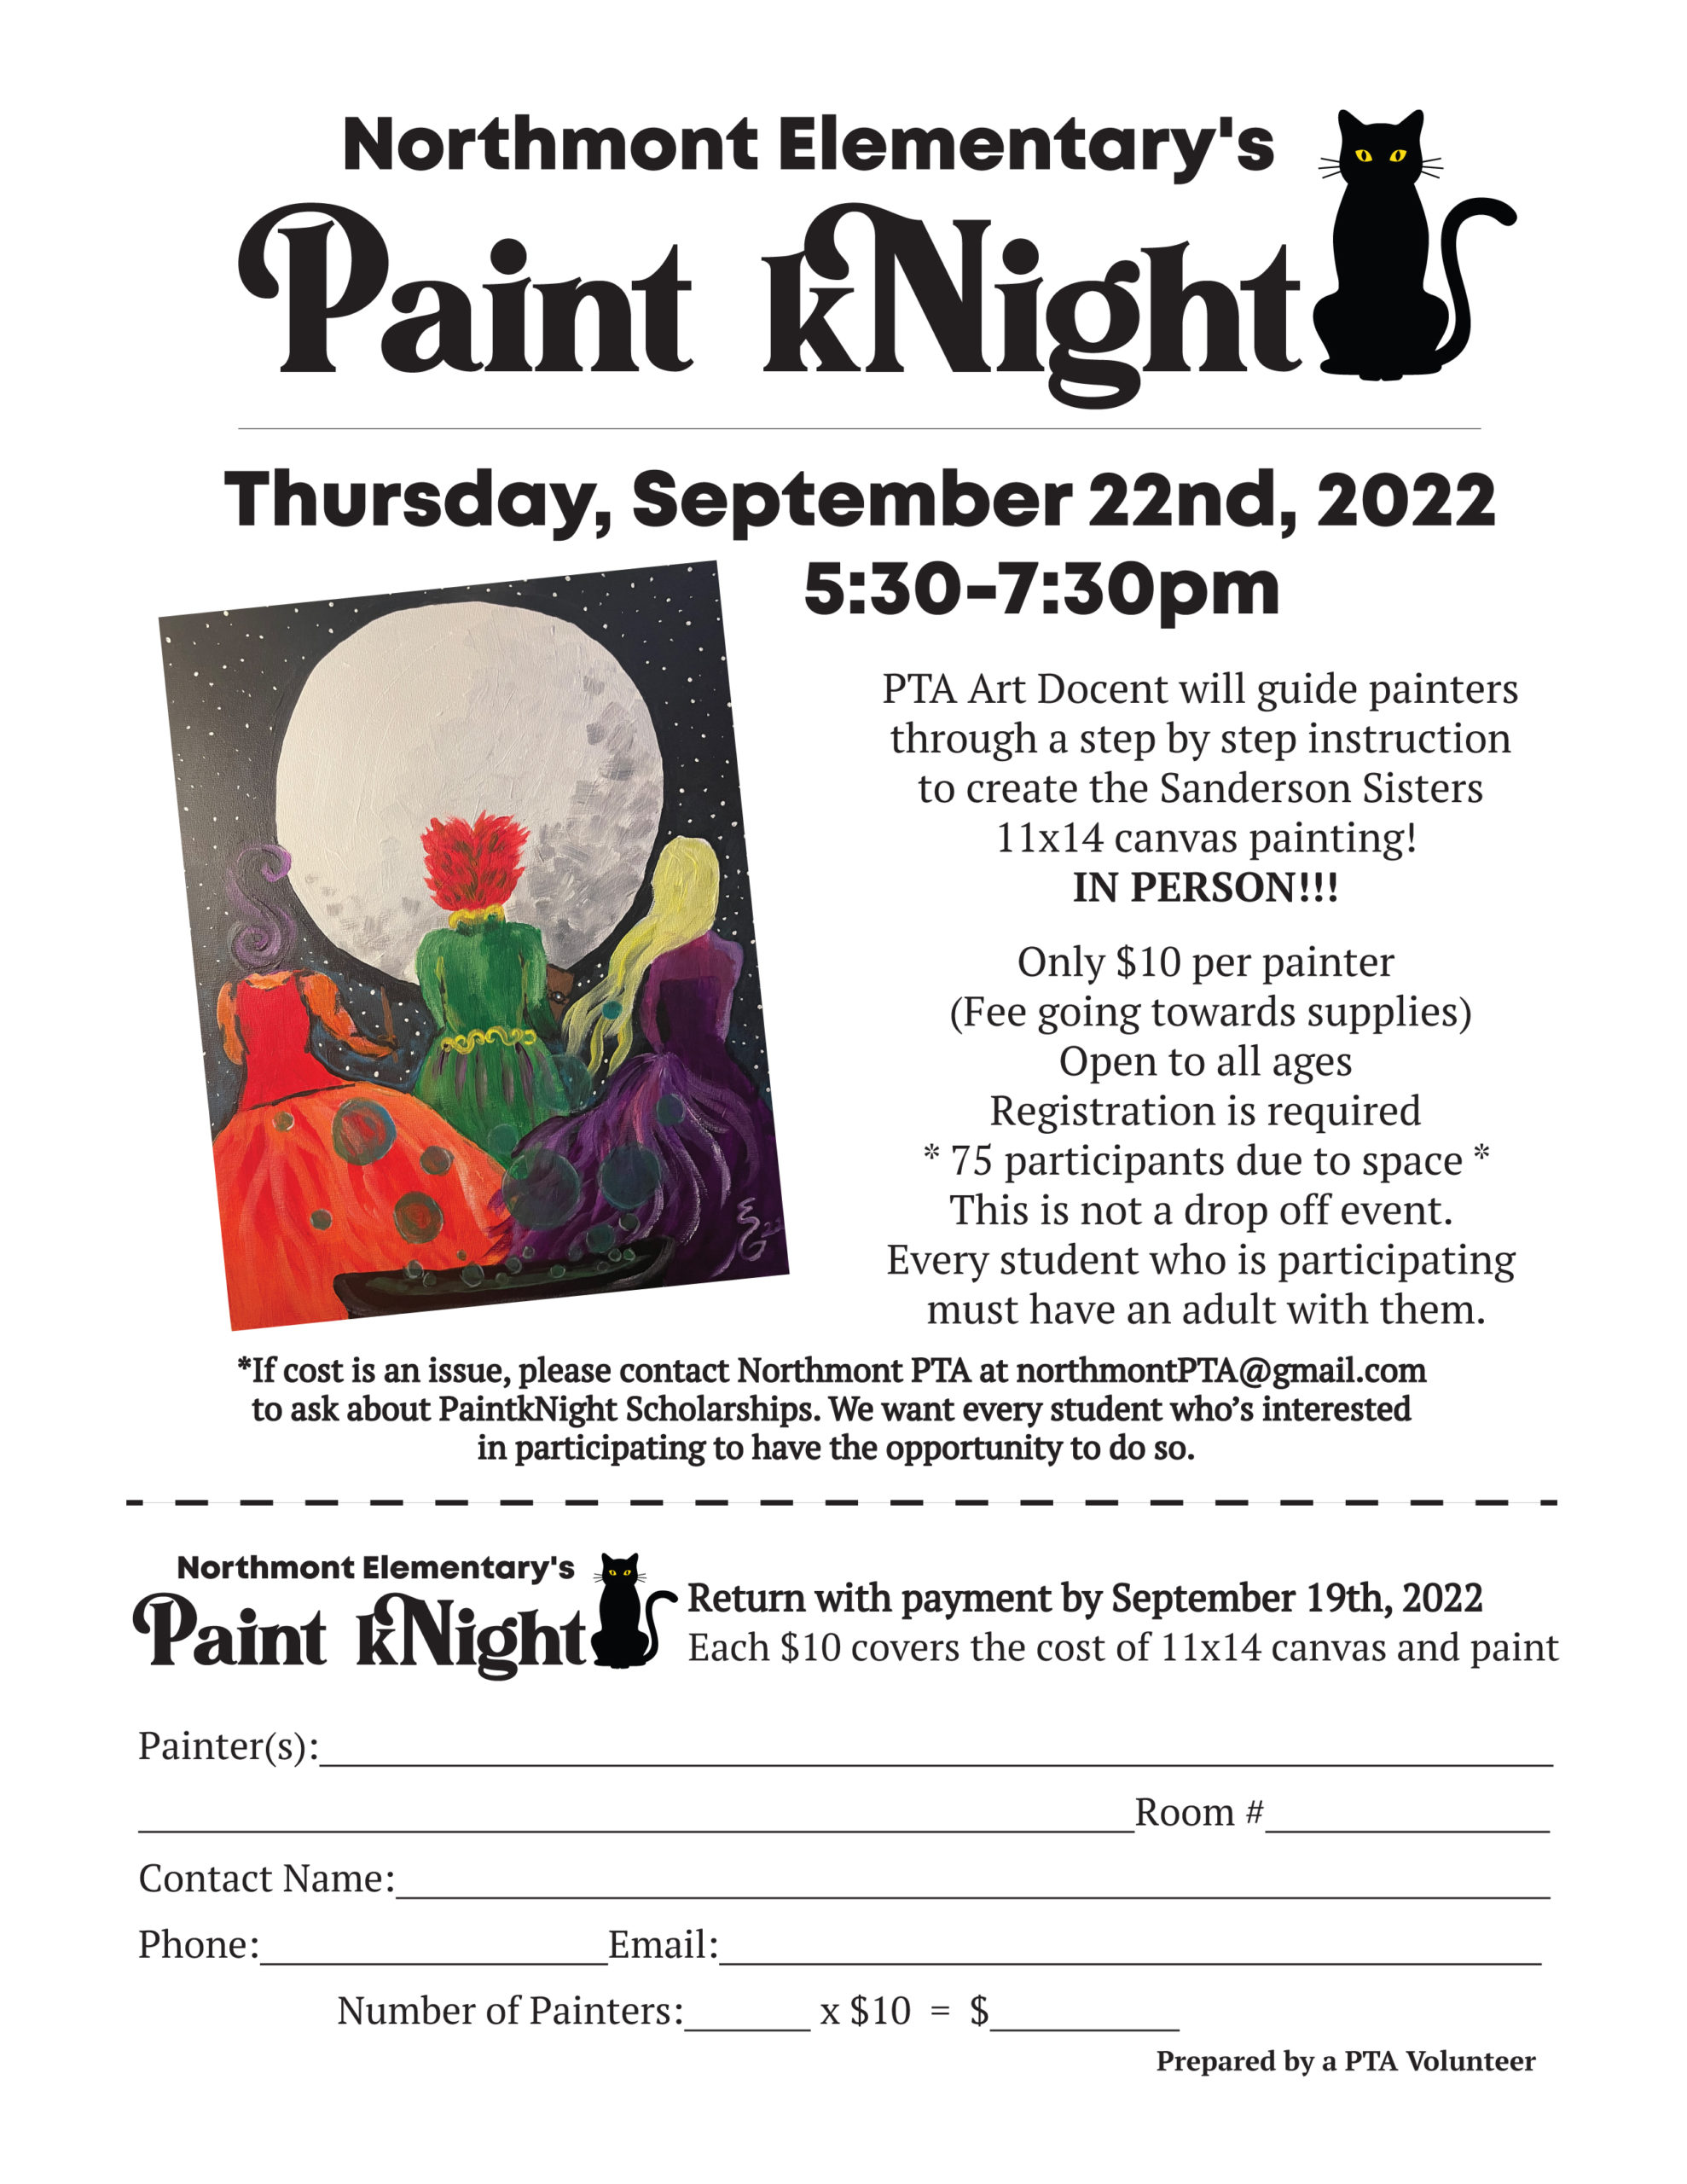 Registration form for Paint kNight. Copies were sent home in Friday Folders.